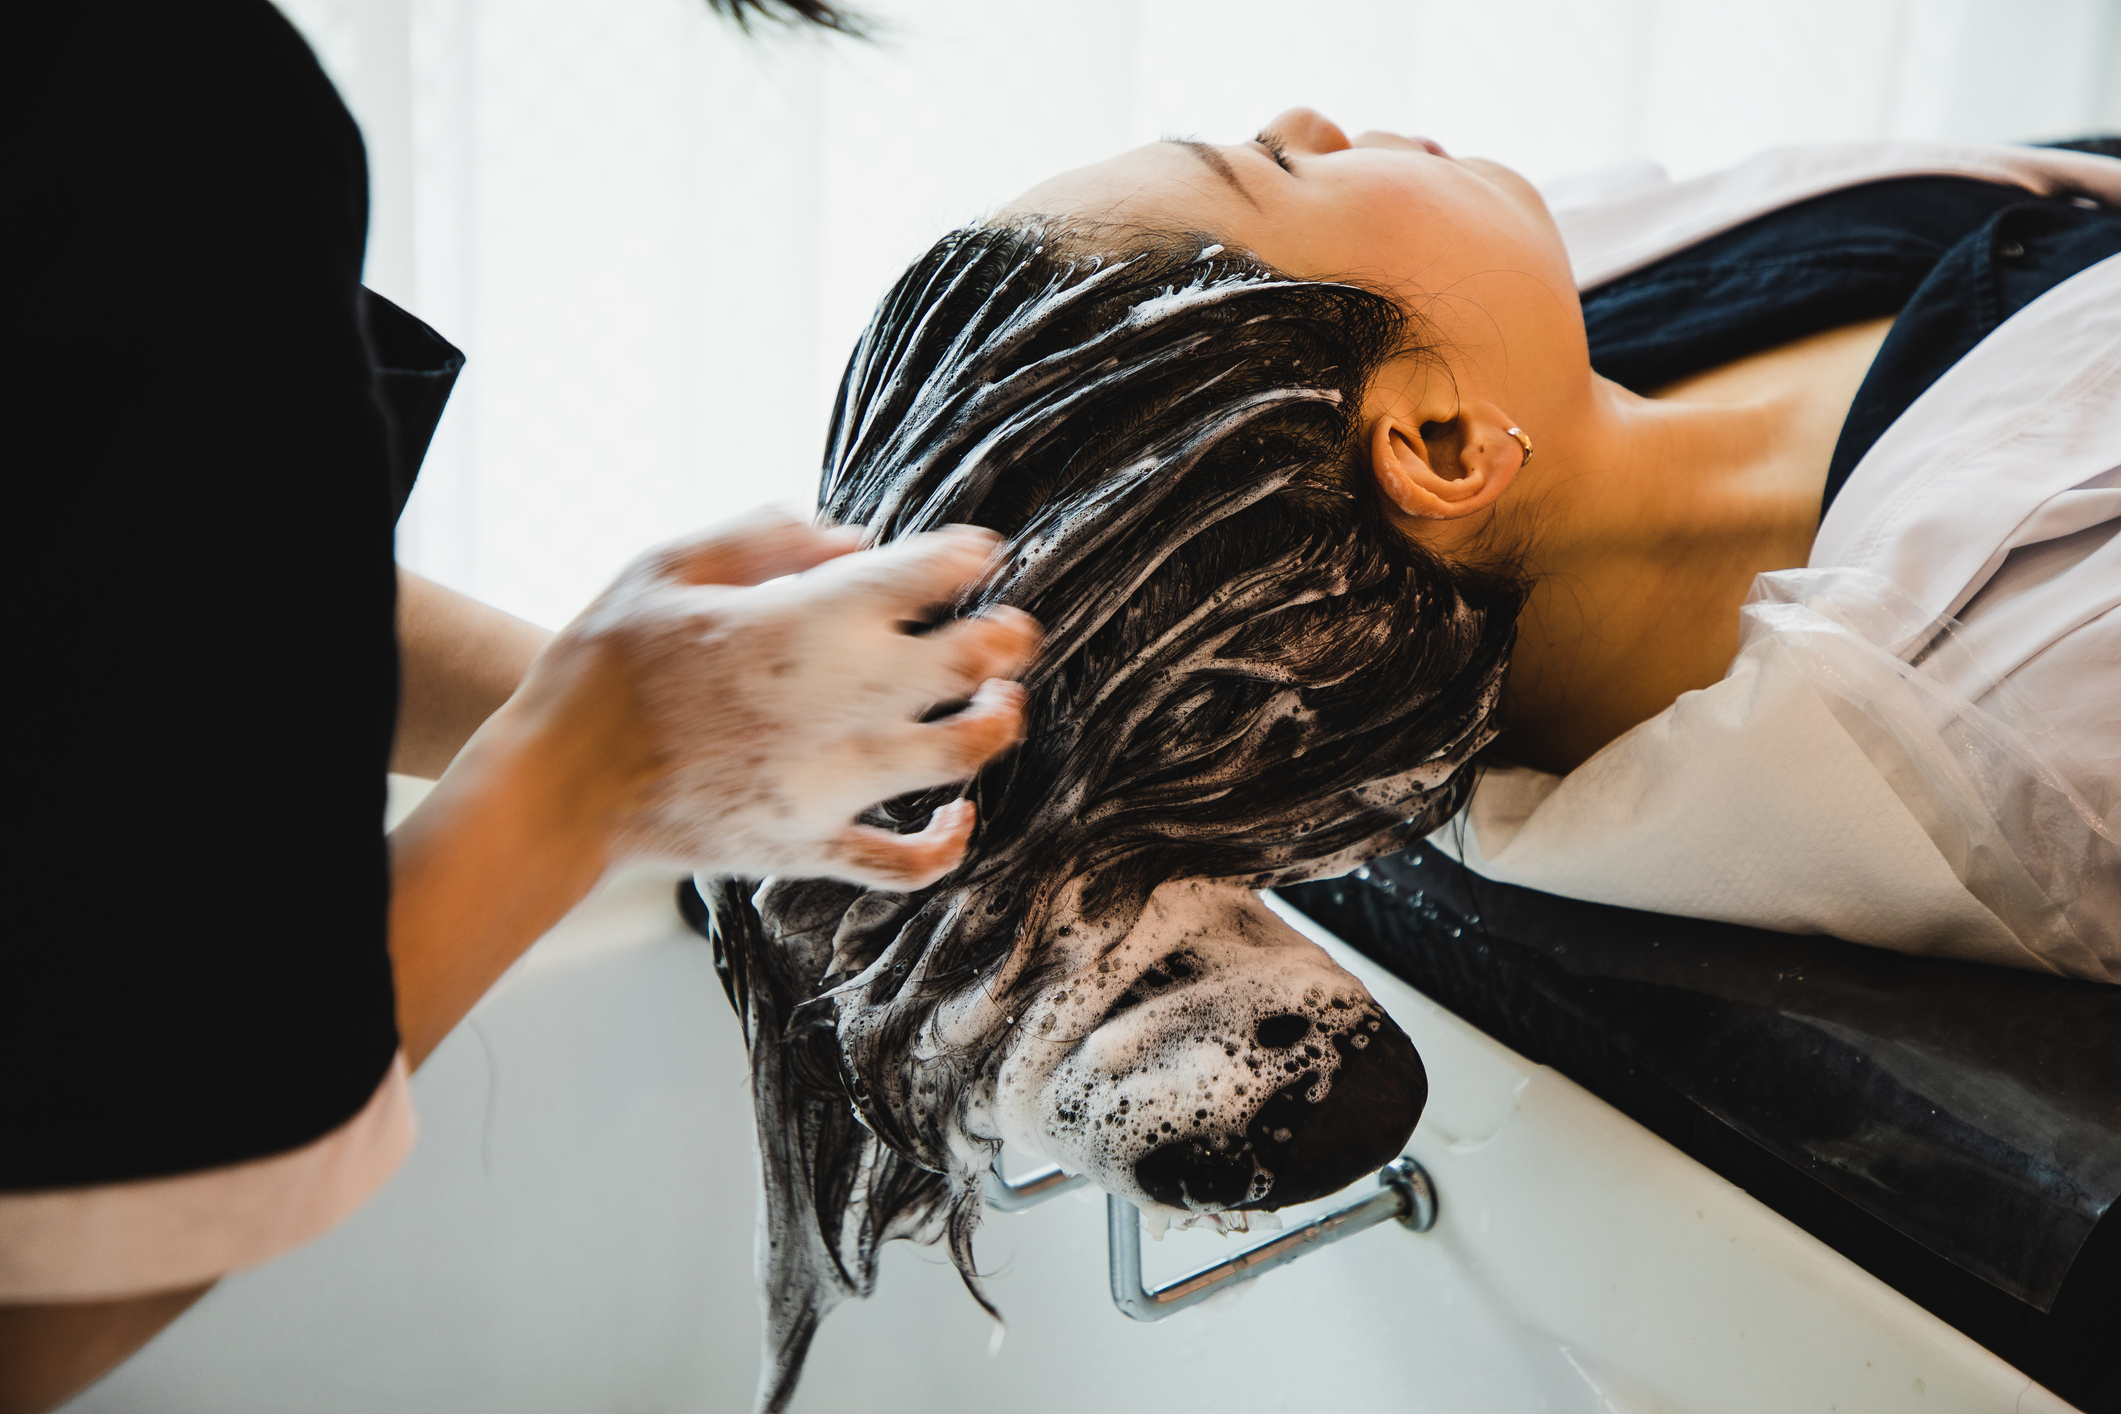 A woman is getting her hair washed